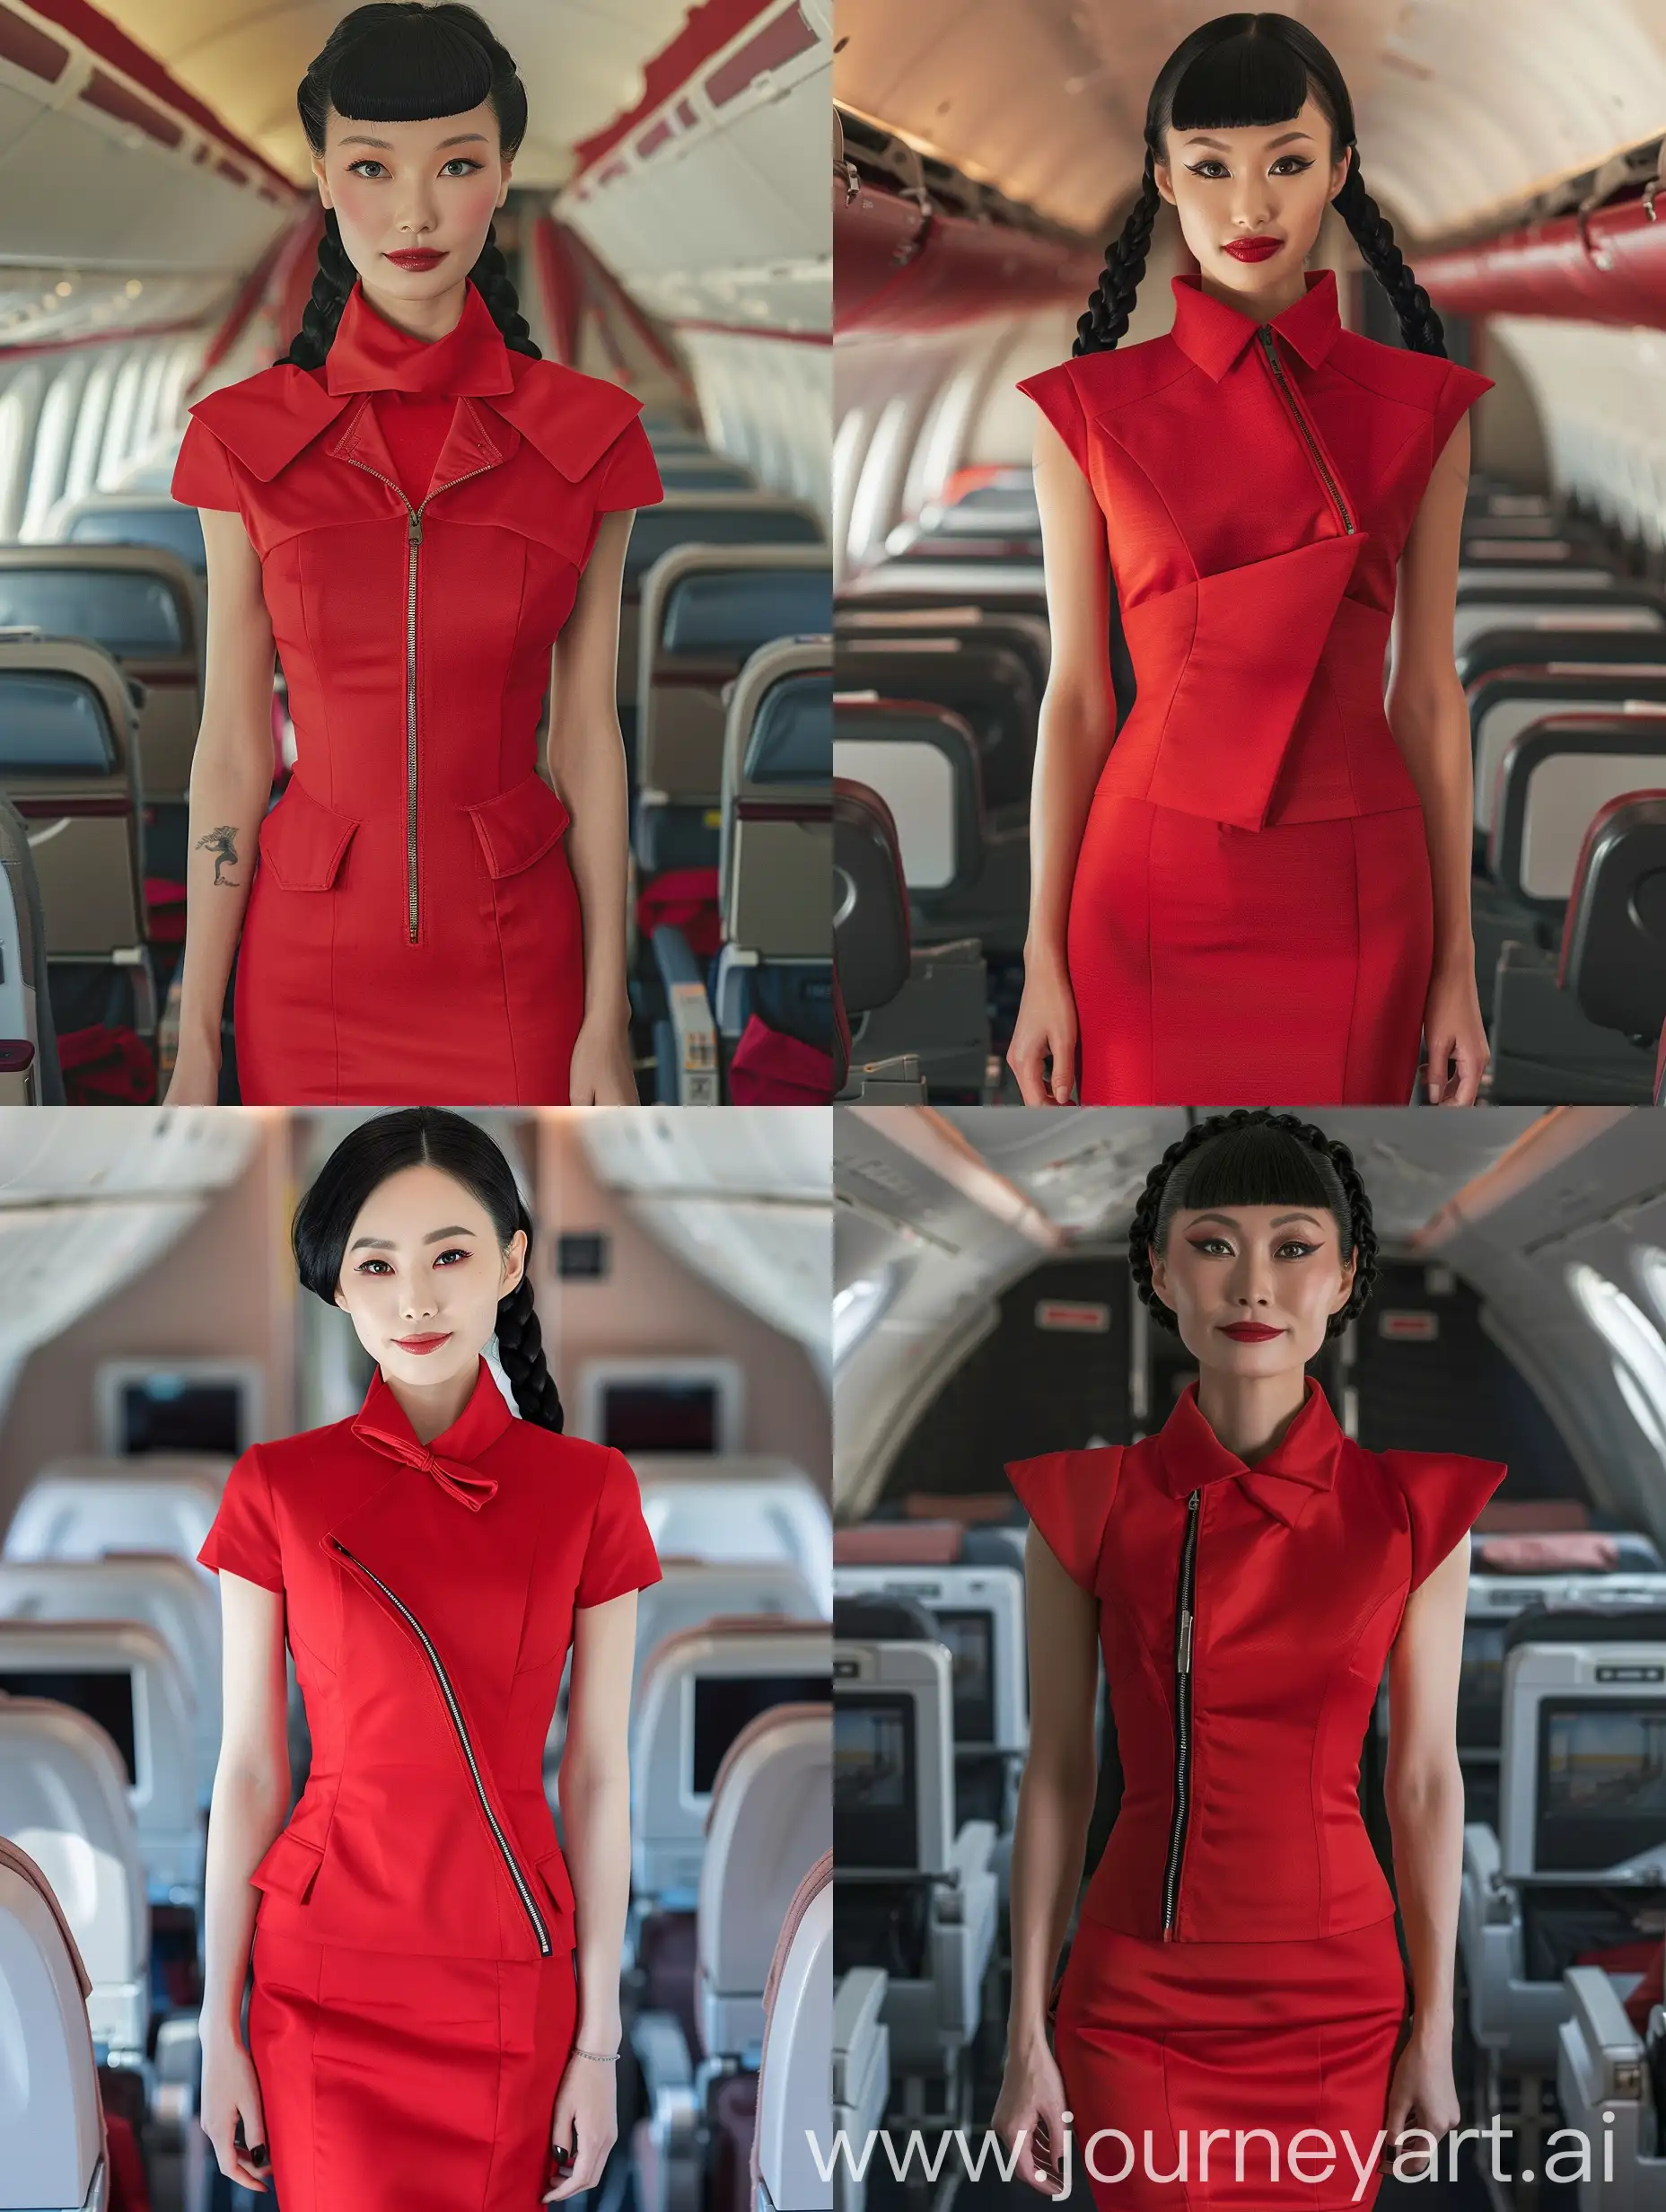 Japanese-Stewardess-in-Modern-Red-Uniform-Smiling-Proudly-in-Airplane-Cabin